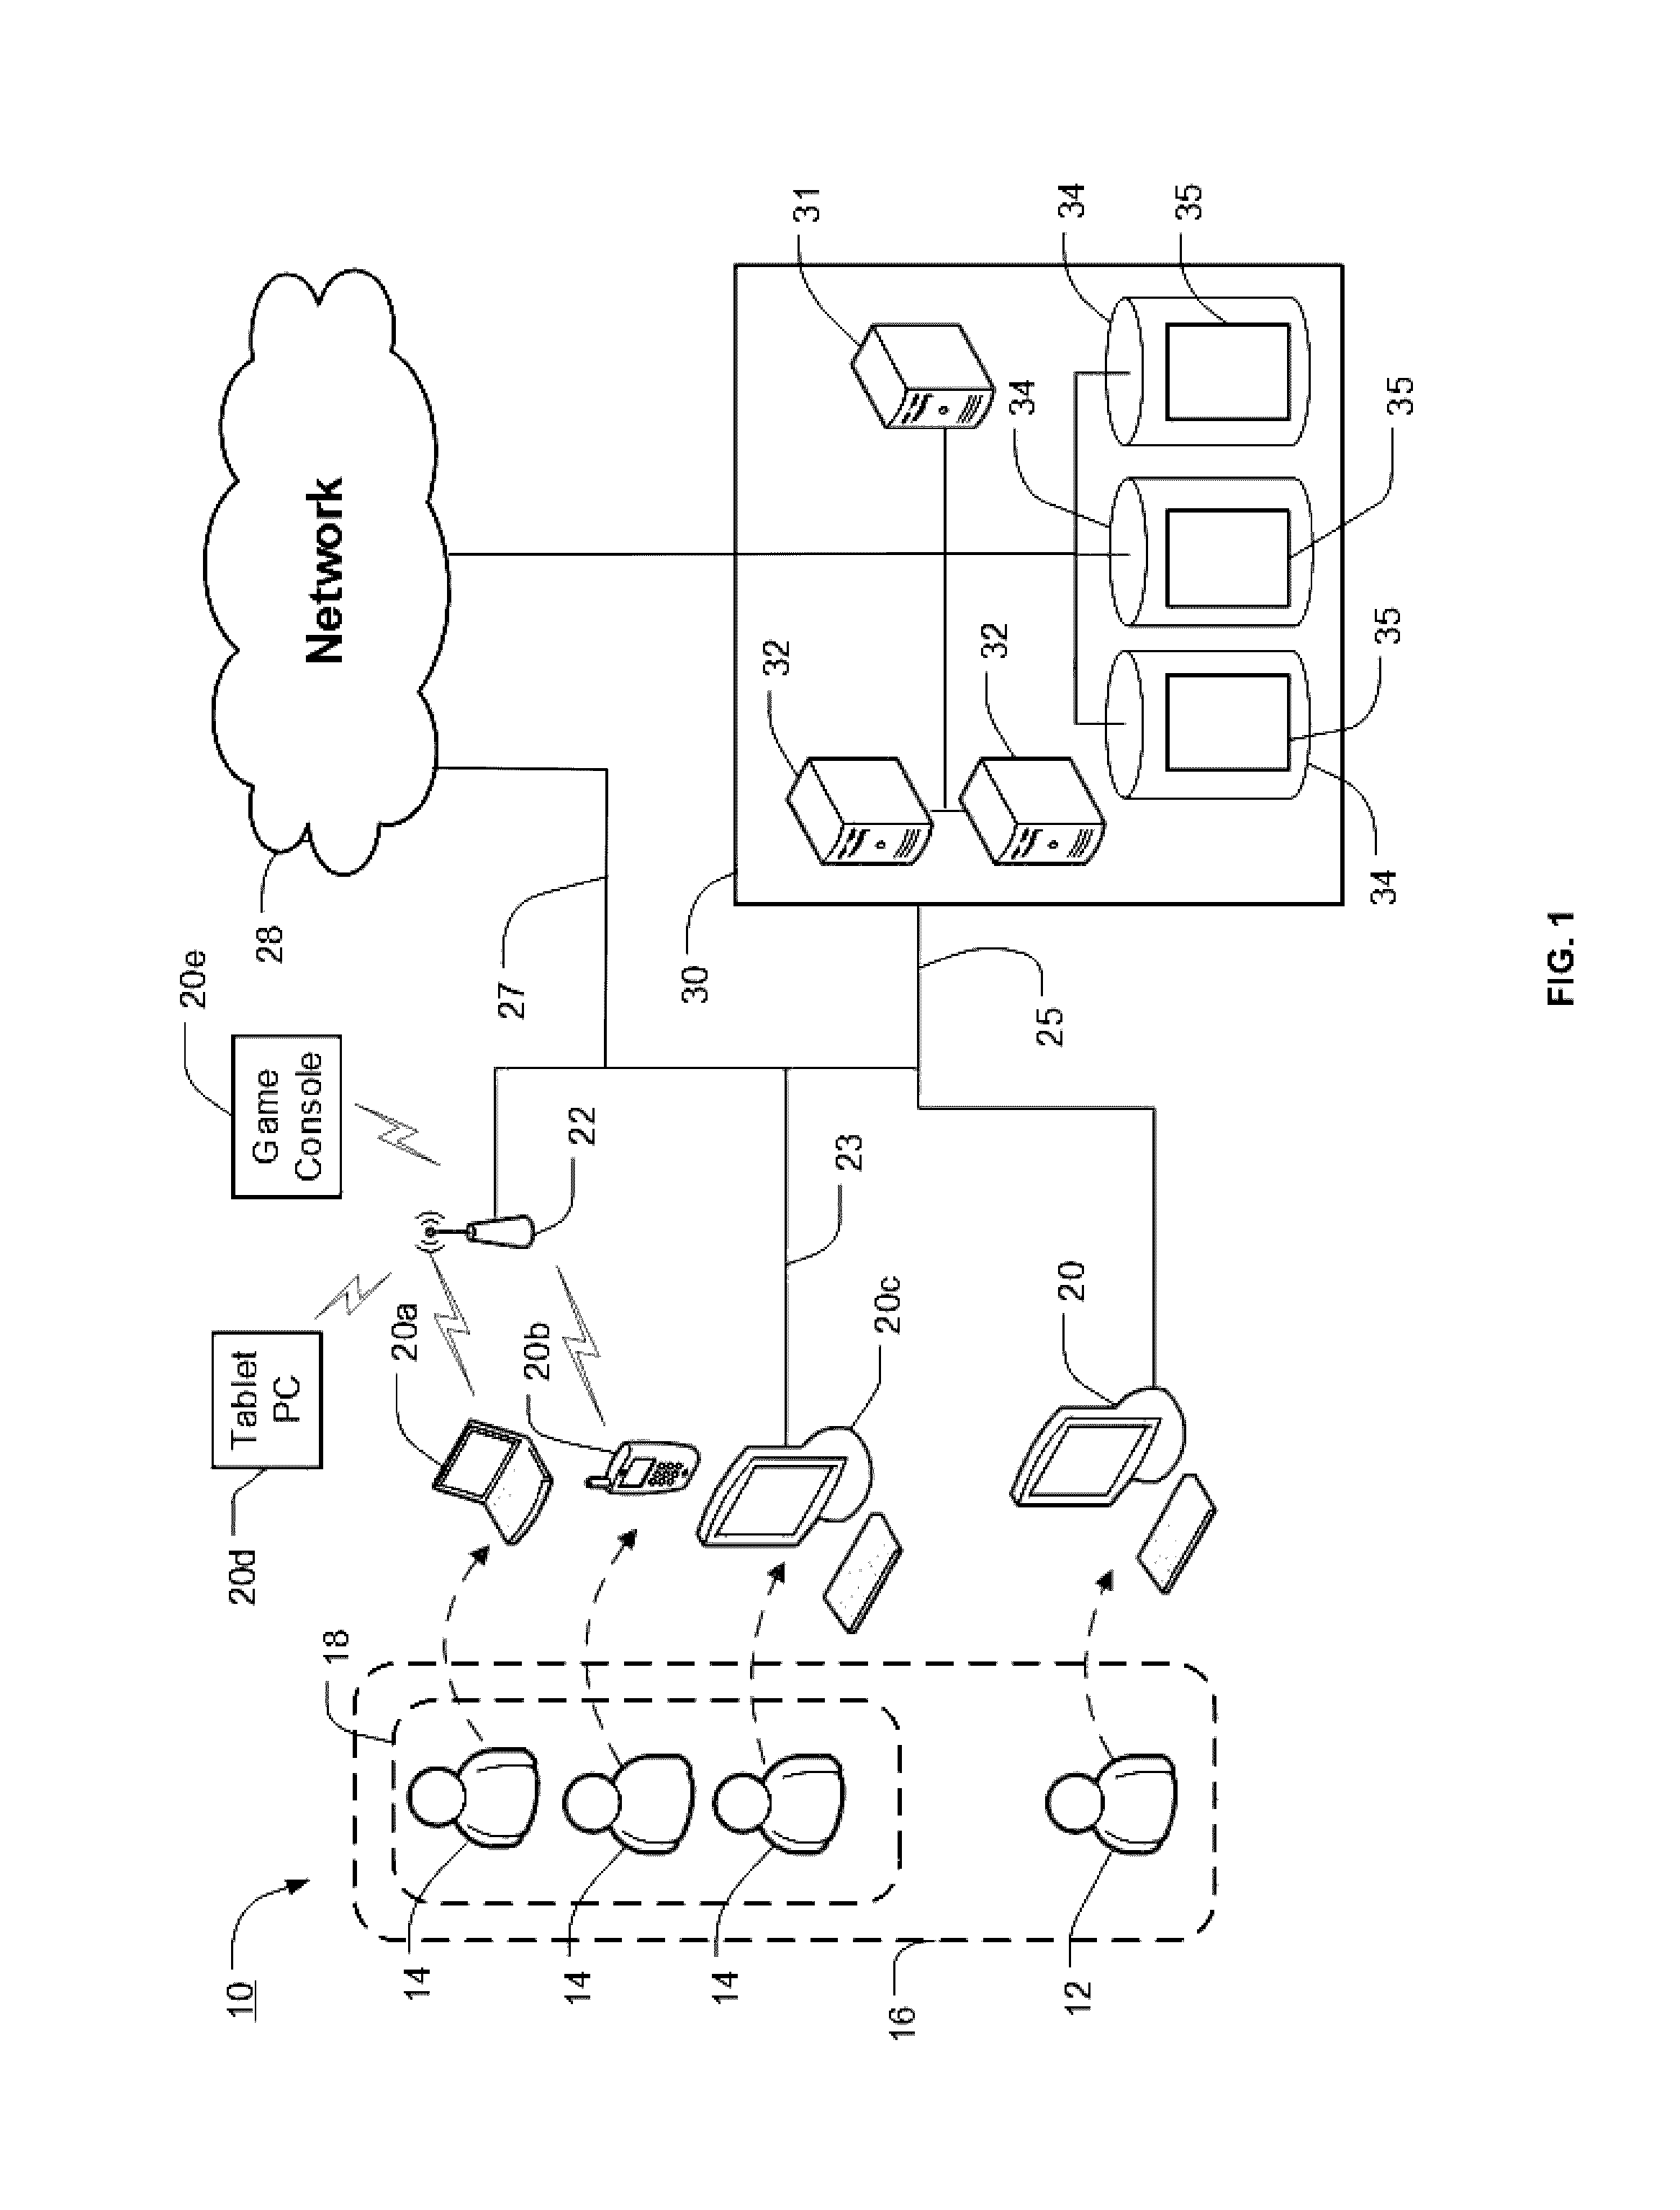 Methods and systems for providing evaluation resources for users of an electronic learning system